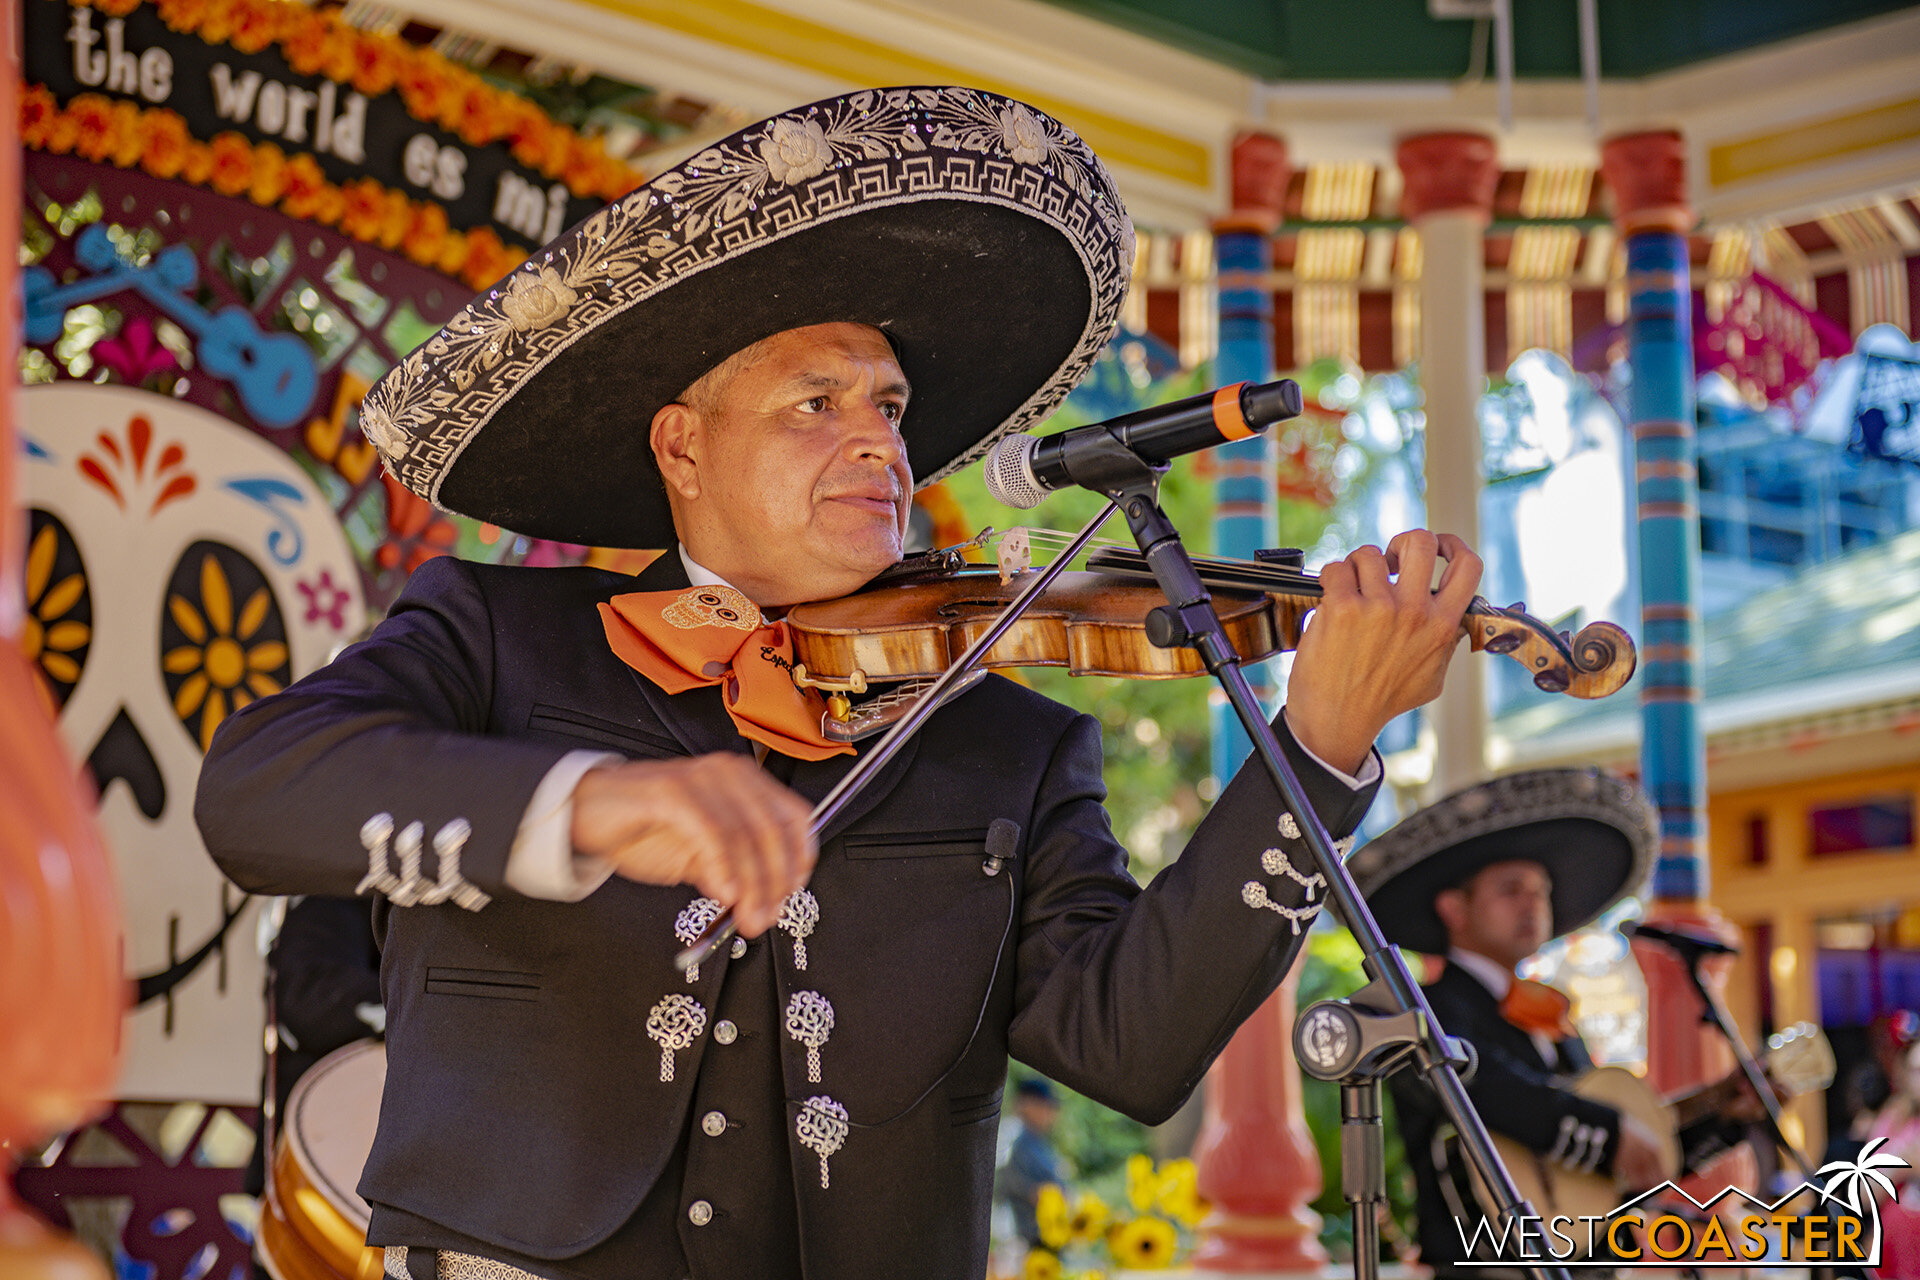  Mariachi concerts occur several times a day. 